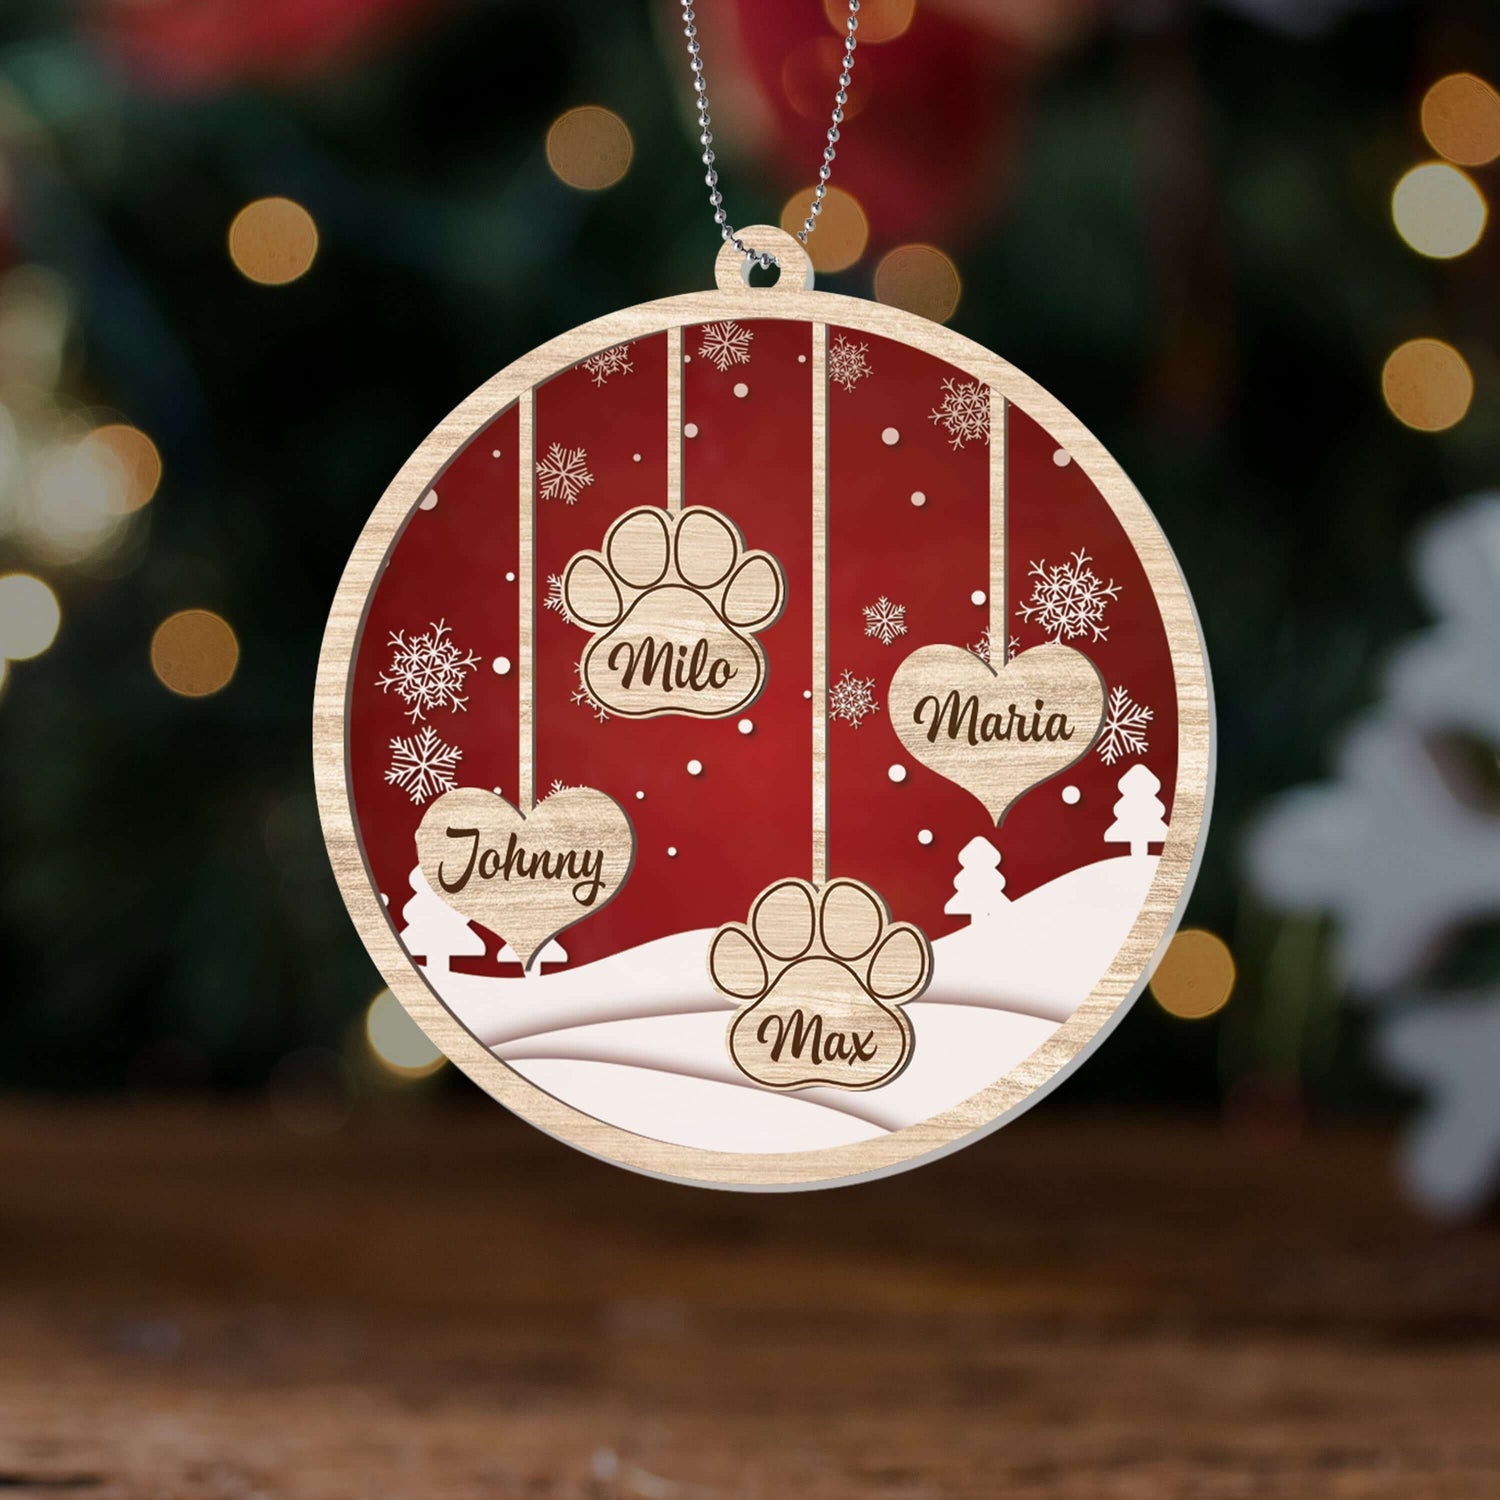 1500OUS2 personalized family ornament with heart and paw print ornament